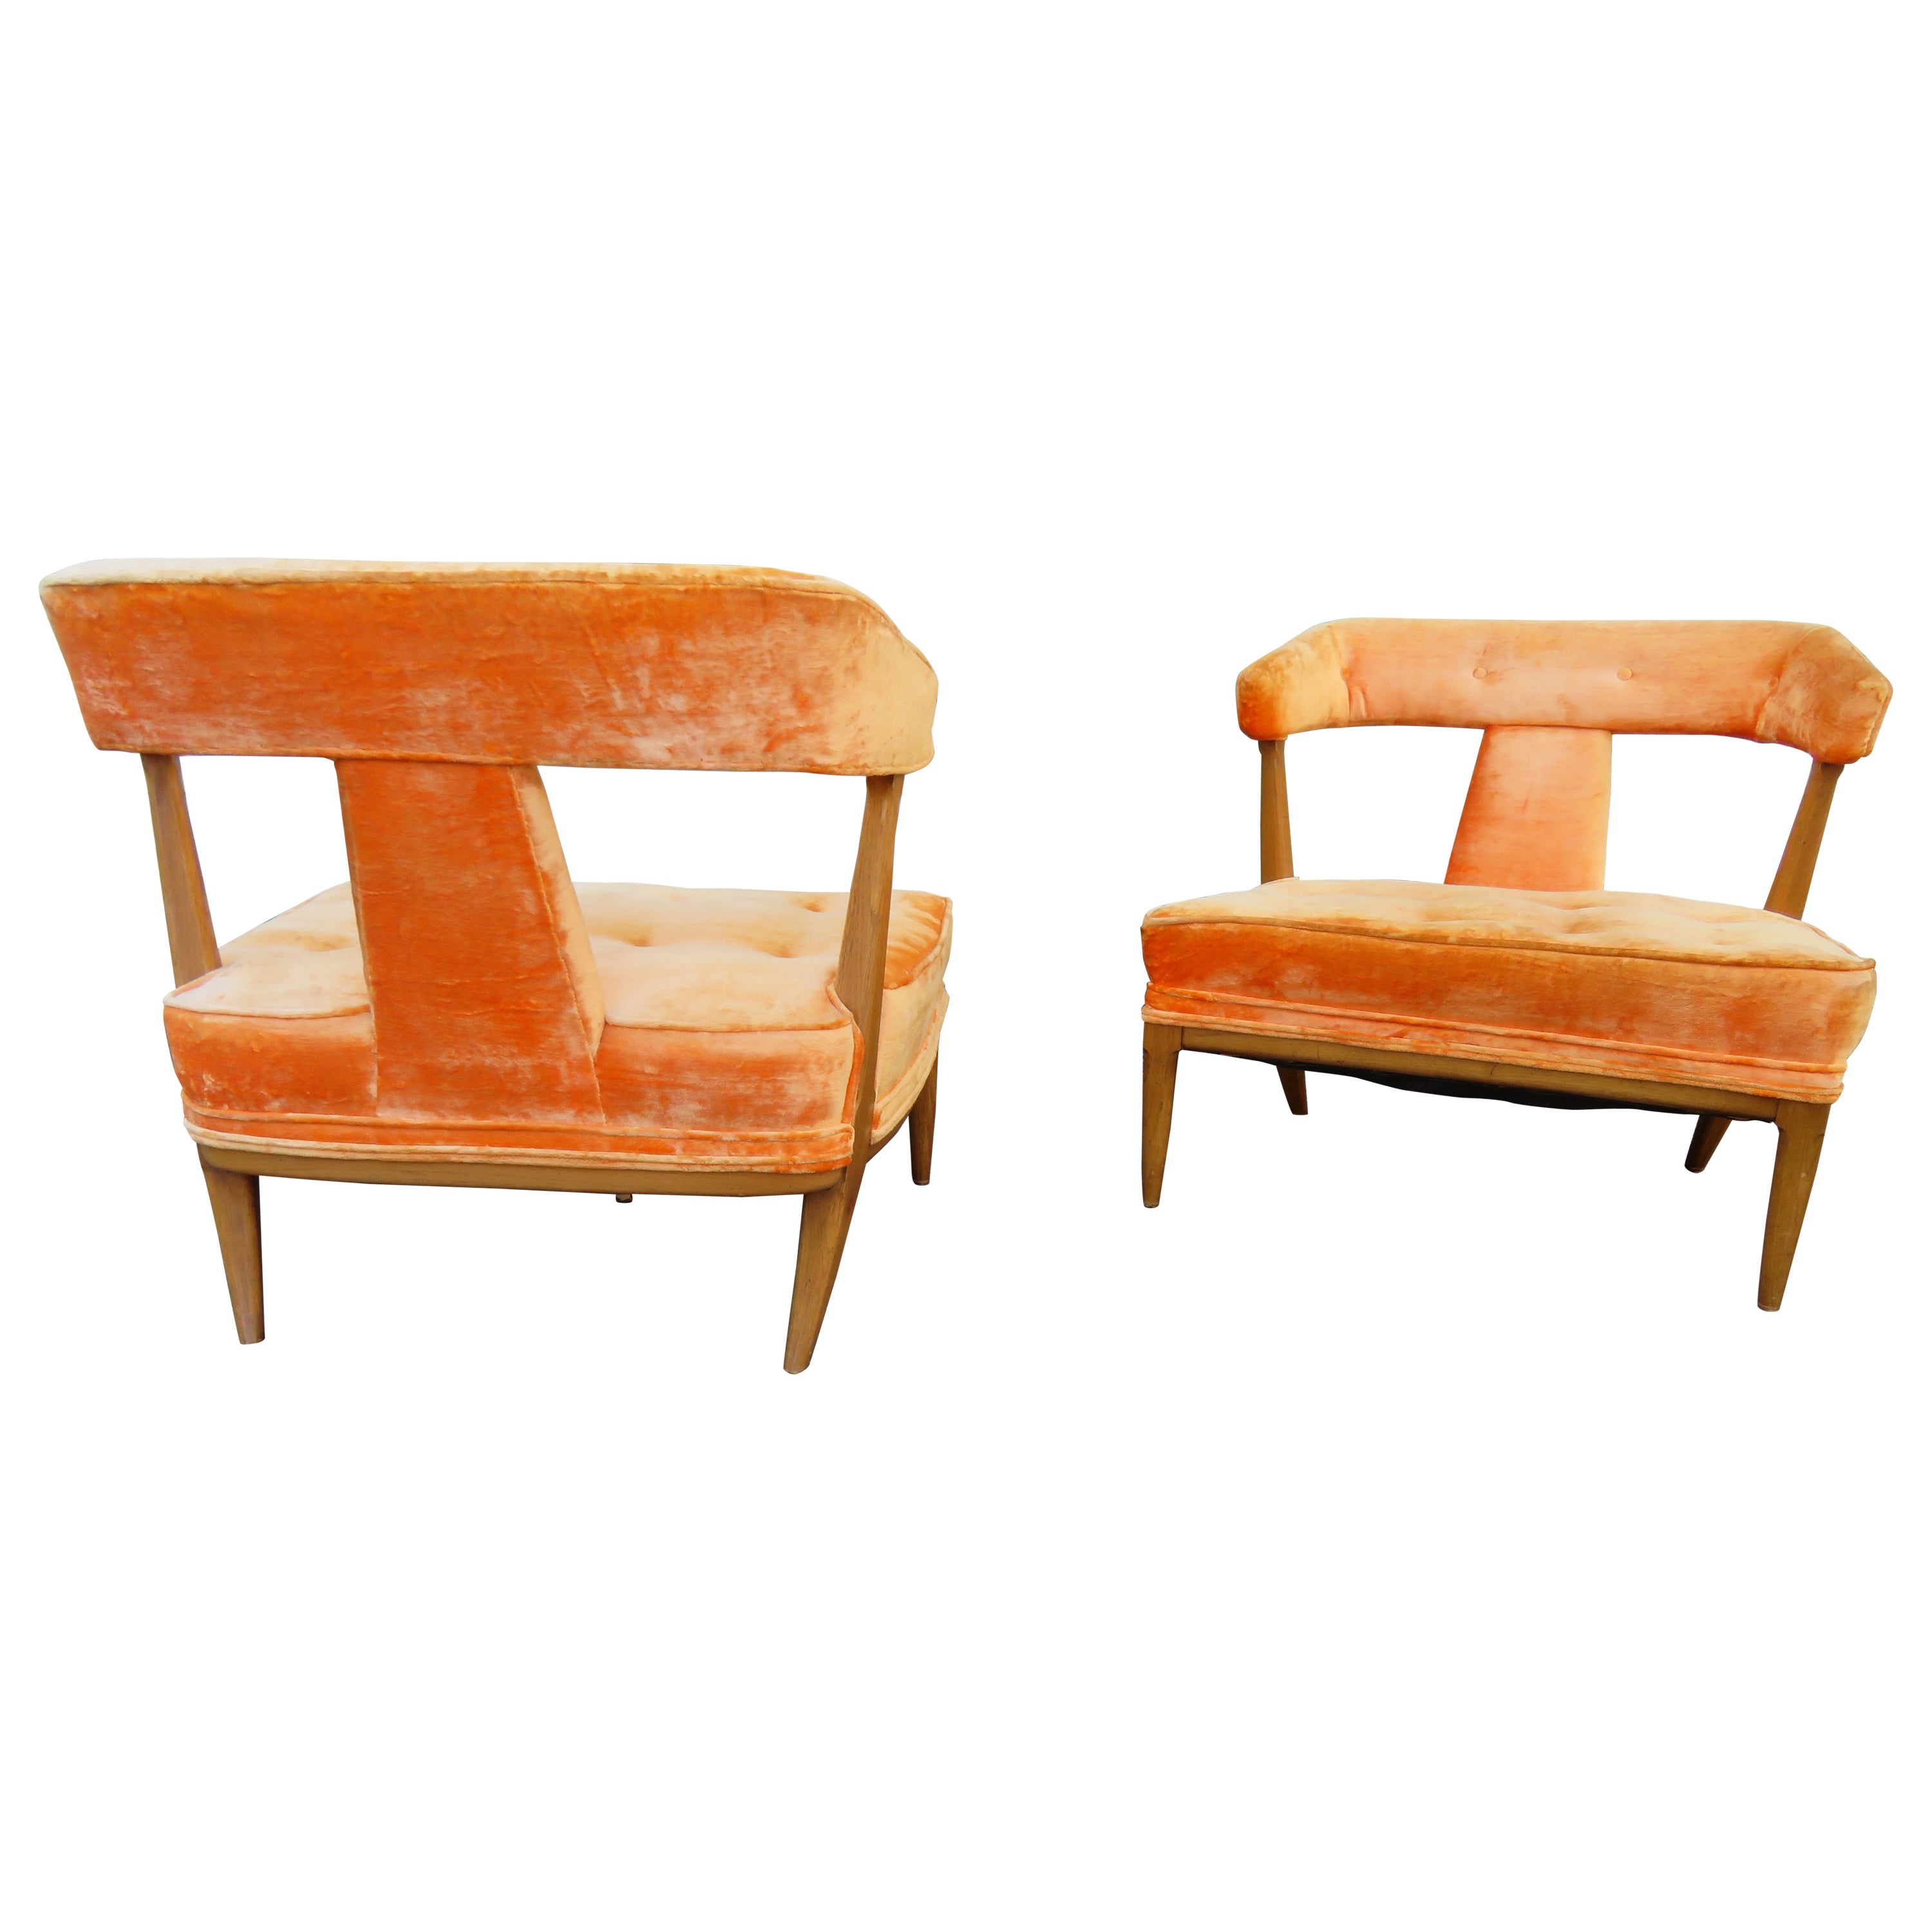 Gorgeous Pair Lubberts & Mulder Tomlinson Sophisticate Wide Seat Lounge Chairs